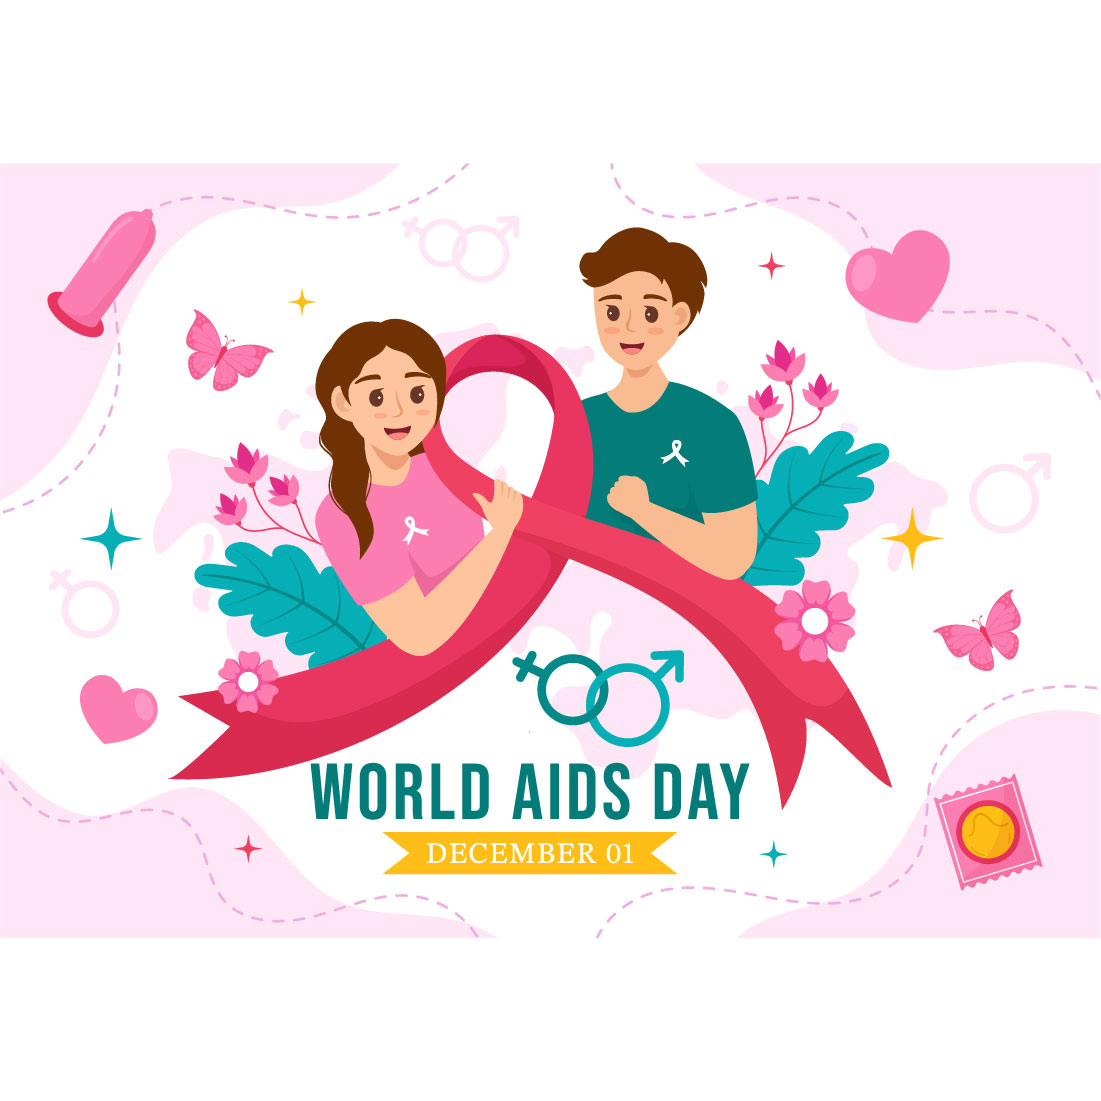 14 World Aids Day Illustration cover image.